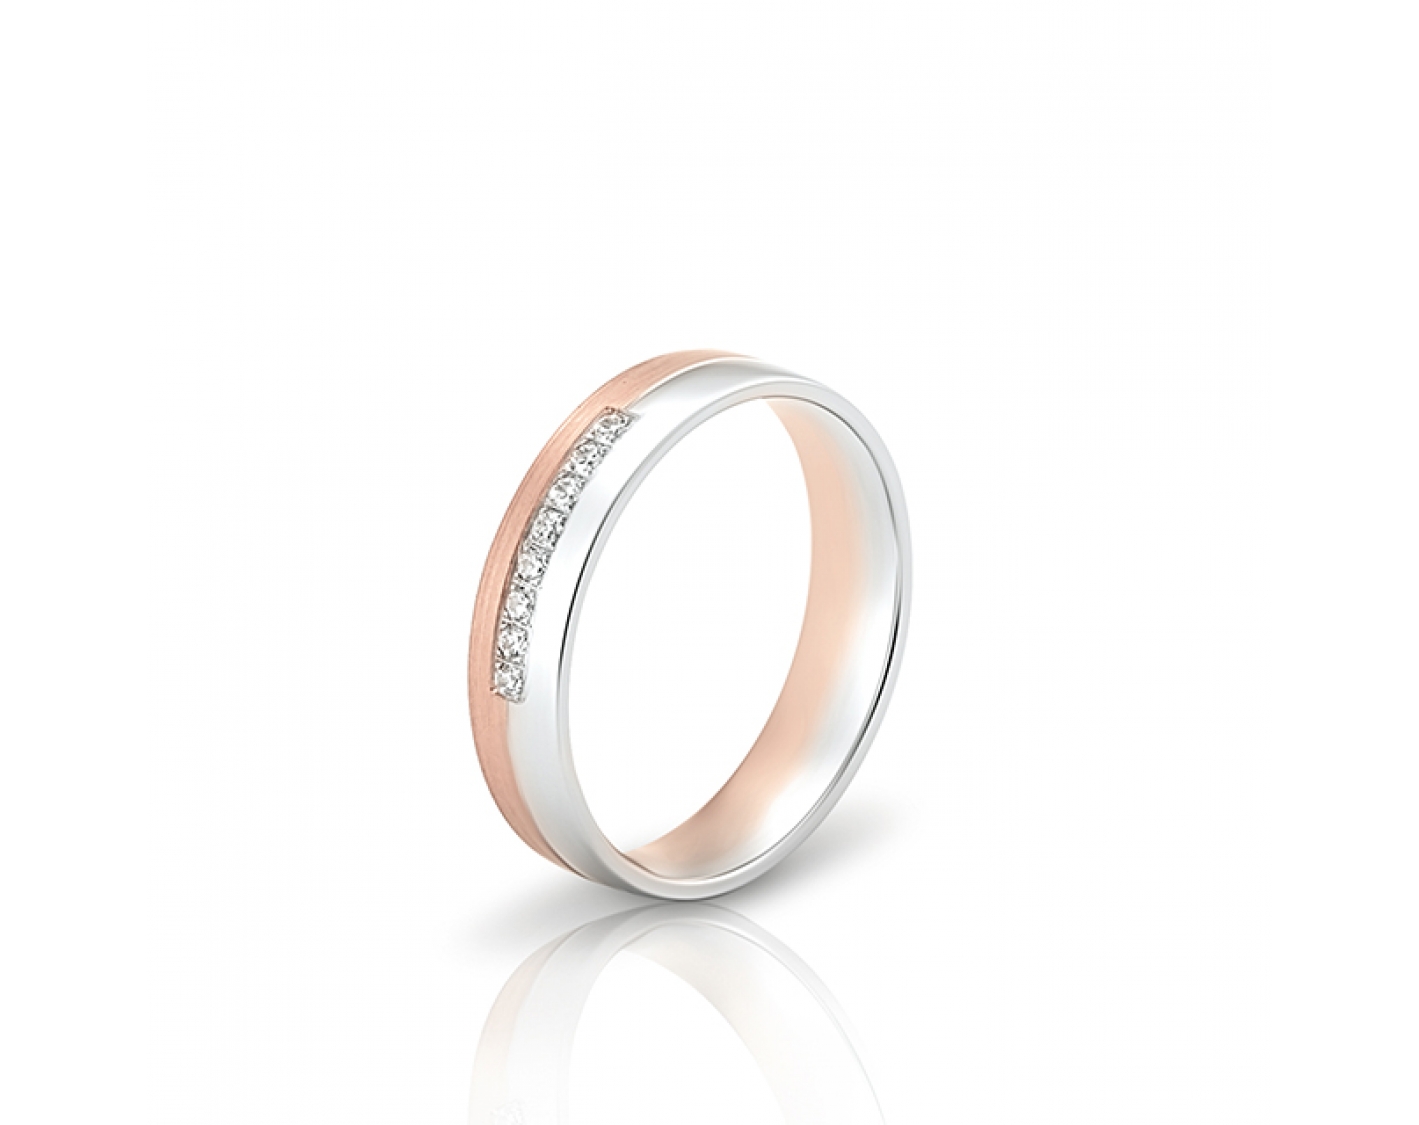 dual-tone 4,5mm two-toned* wedding band with diamonds